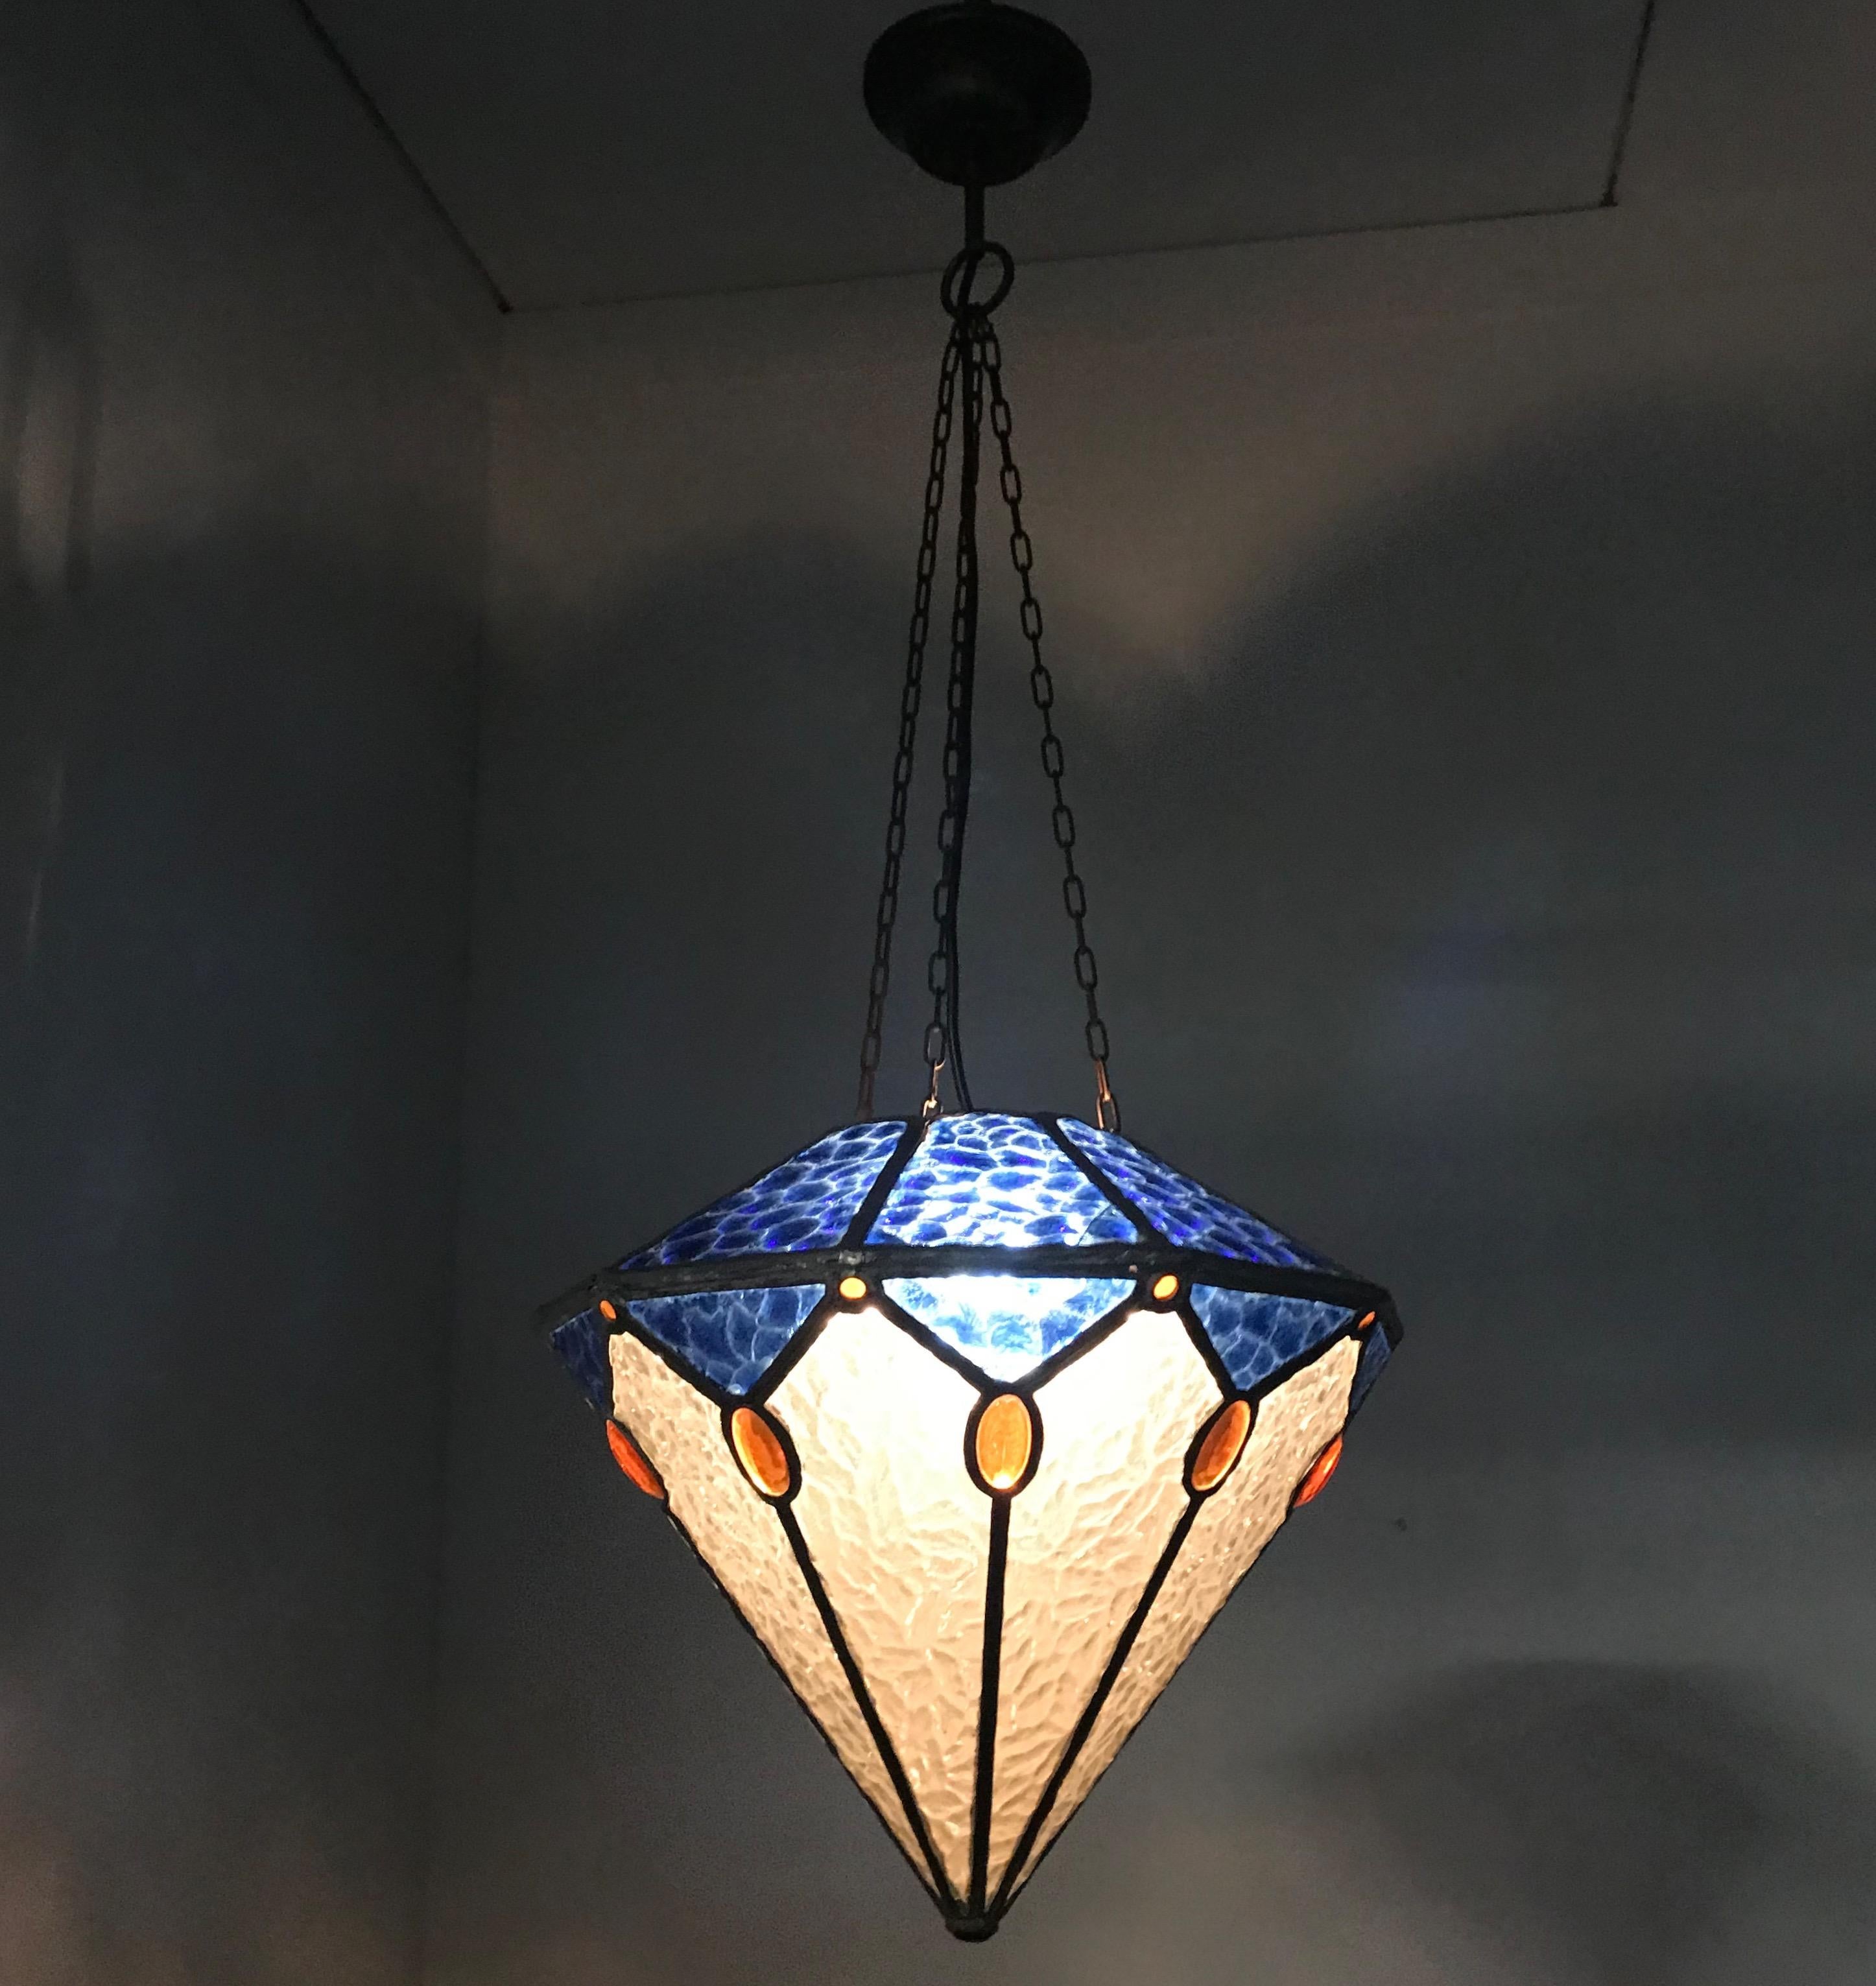 Wonderful ceiling lamp for the perfect ambiance.

If you are looking for a rare, beautiful and geometric design Art Deco pendant then this unique specimen from the 1920s could be the one for you. This diamant shape pendant has several stunning